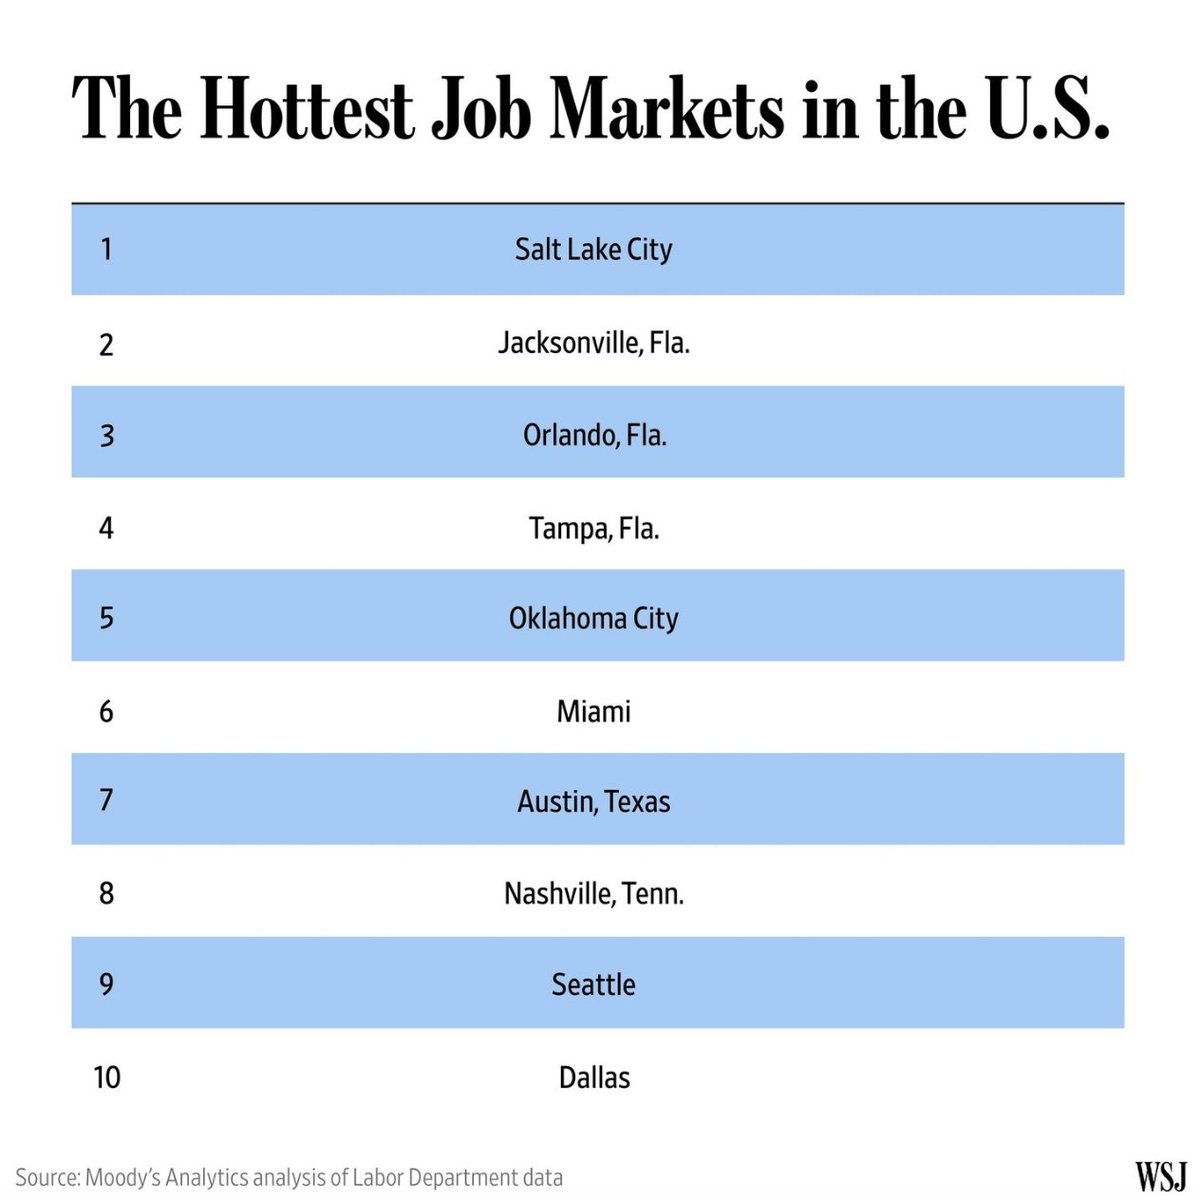 The hottest job markets in the US